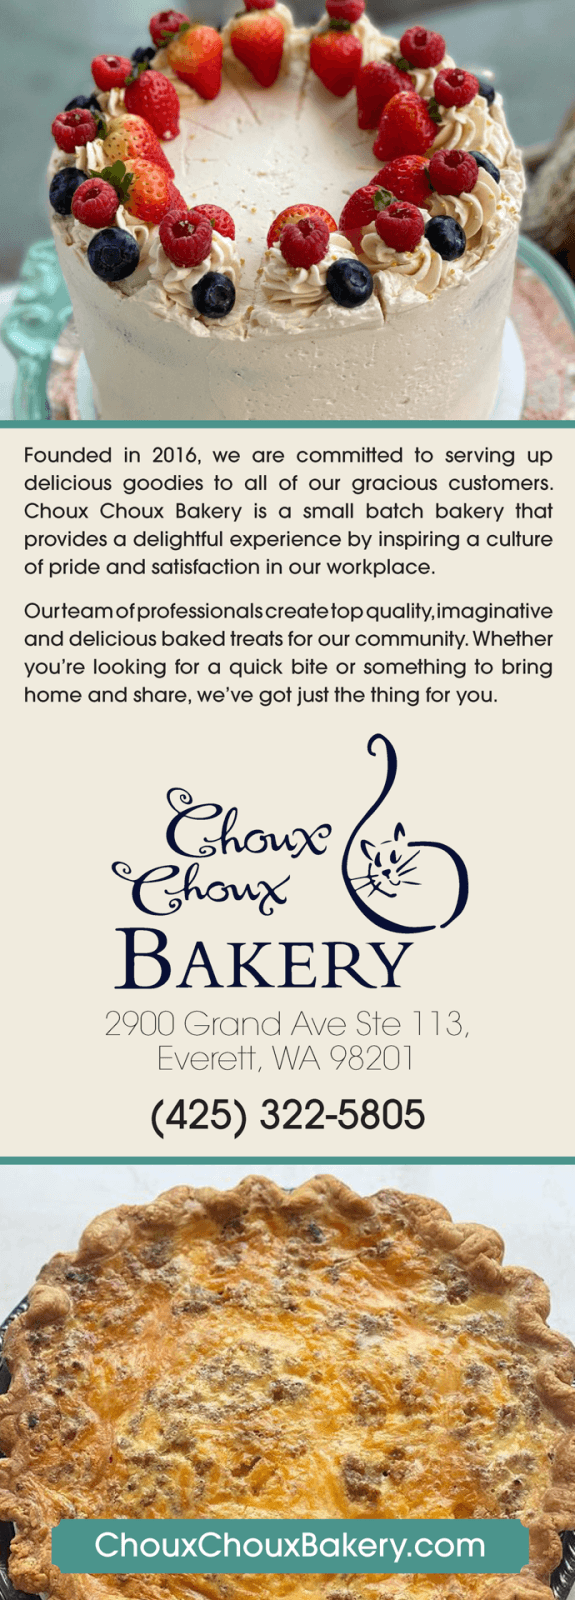 Welcome Magazine Snohomish Summer 2023 Ad Choux Choux Bakery 1